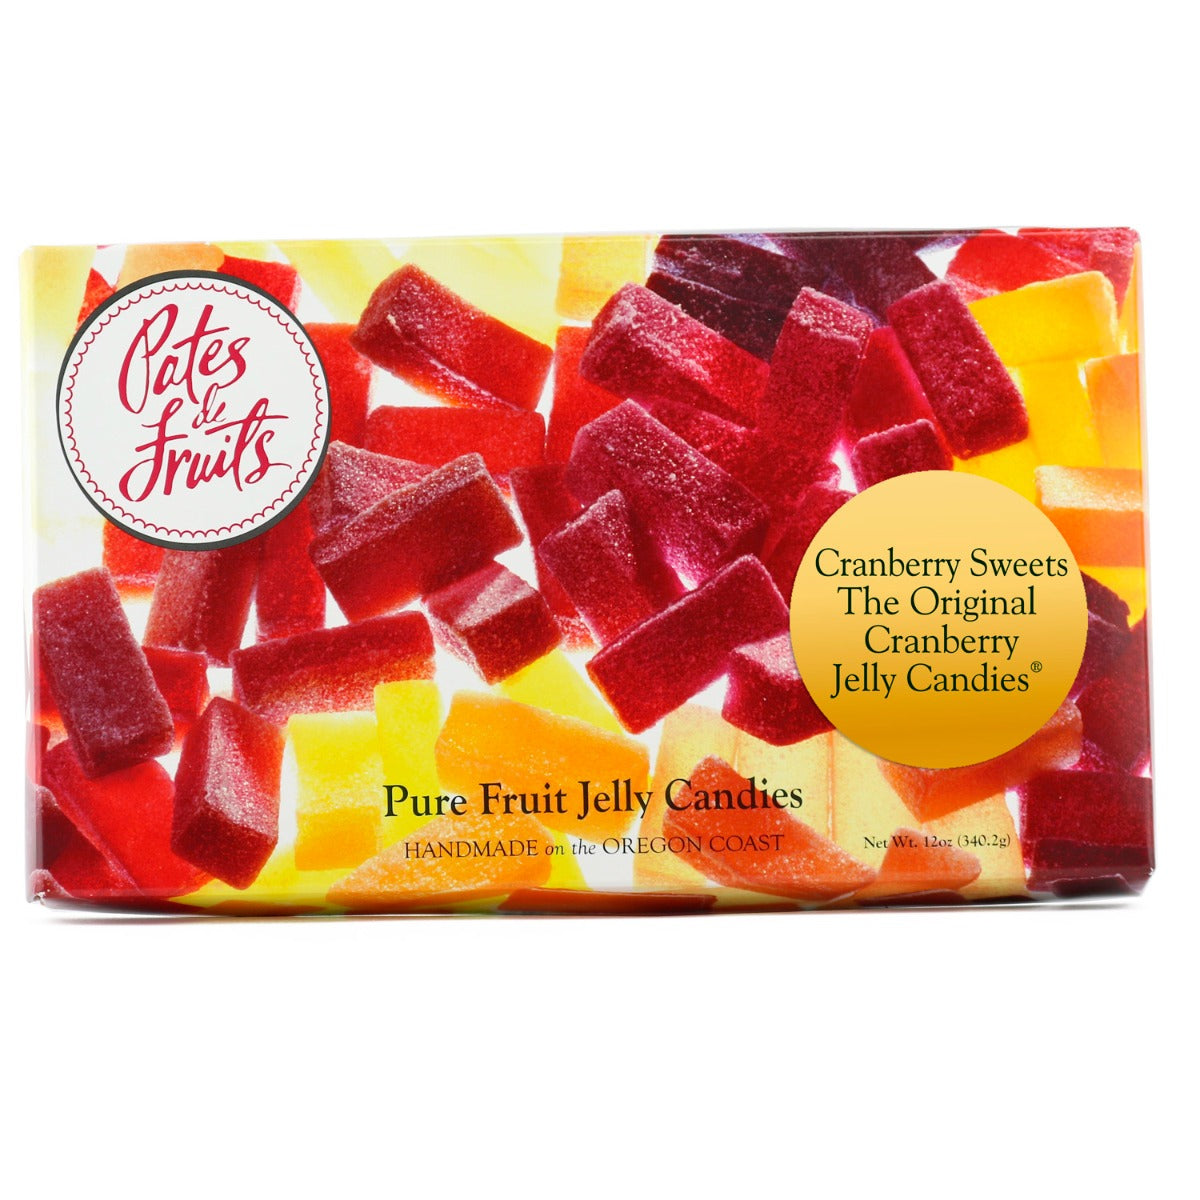 Original Cranberry Jelly Candies without Walnuts 12oz.